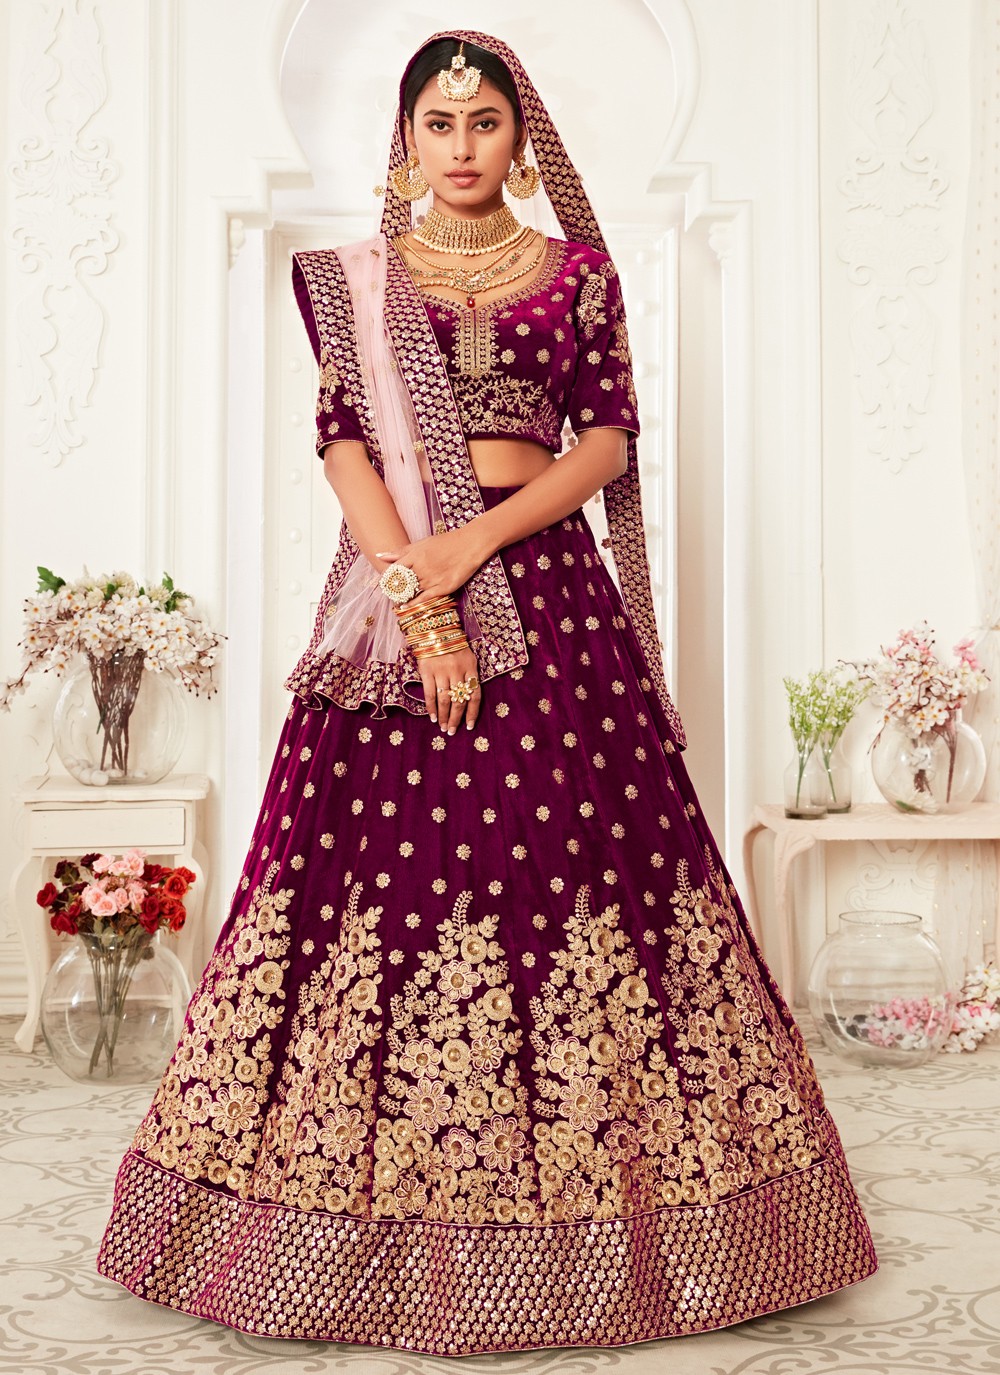 Designer Engagement Lehenga Based On Dusty Pink Color And Net Fabric |  lupon.gov.ph